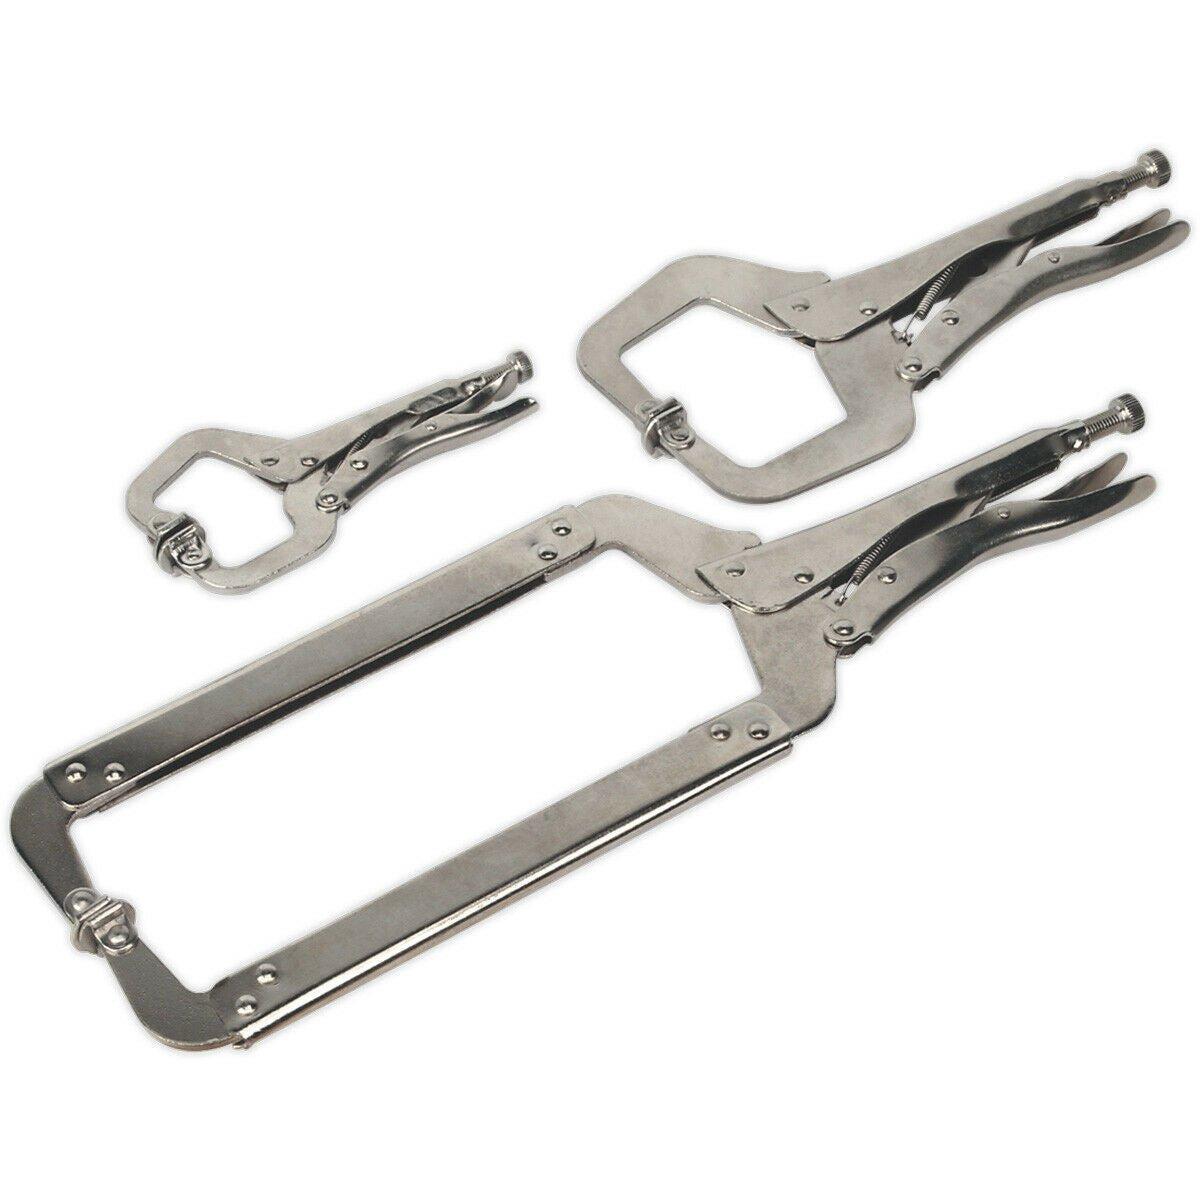 3 Piece Locking C-Clamp Pliers - 170 275 and 450mm Clamps - Nickel Plated Steel